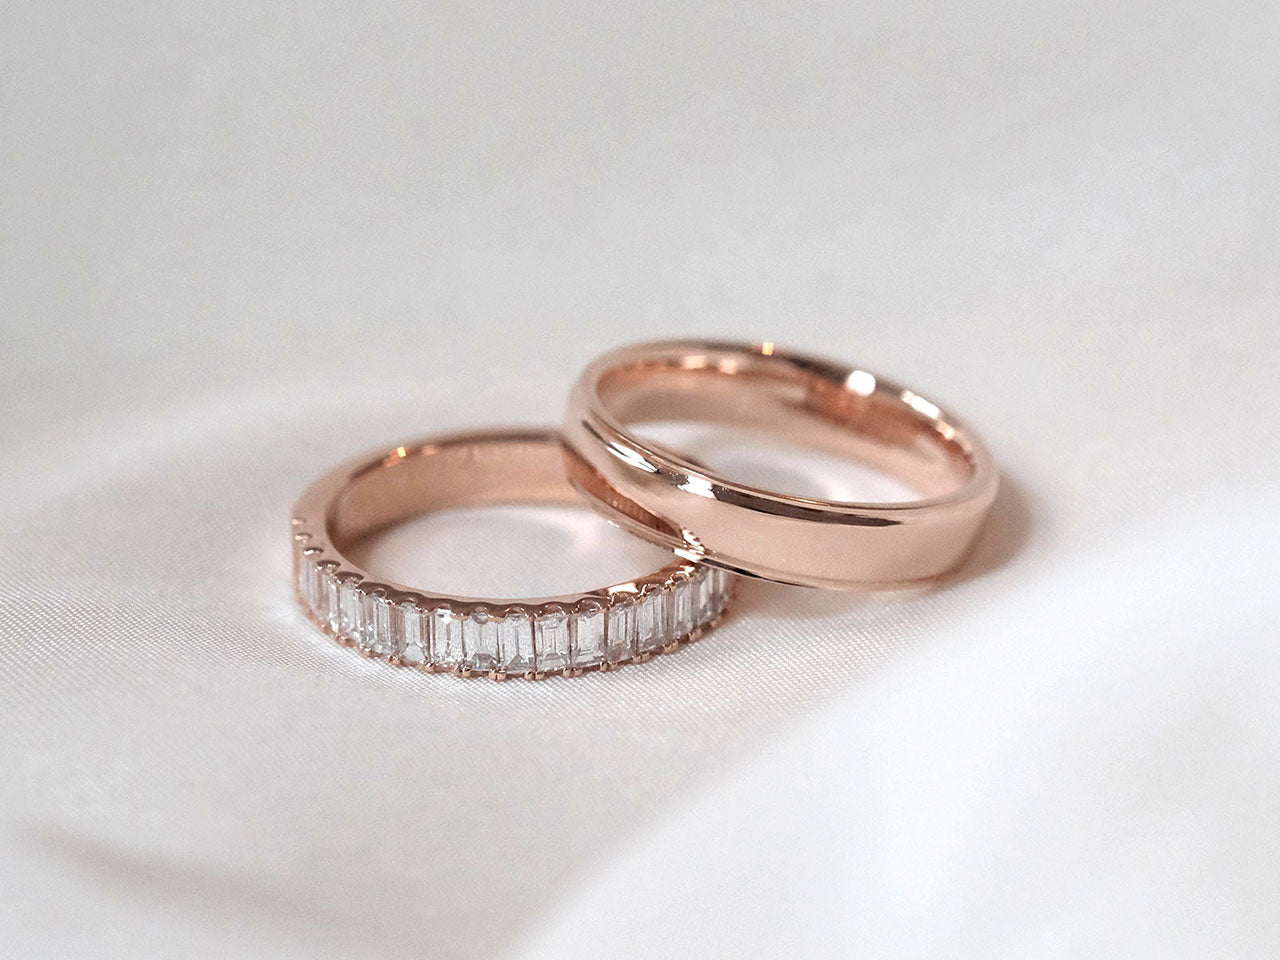 The Column Baguette ring by Holden in rose gold